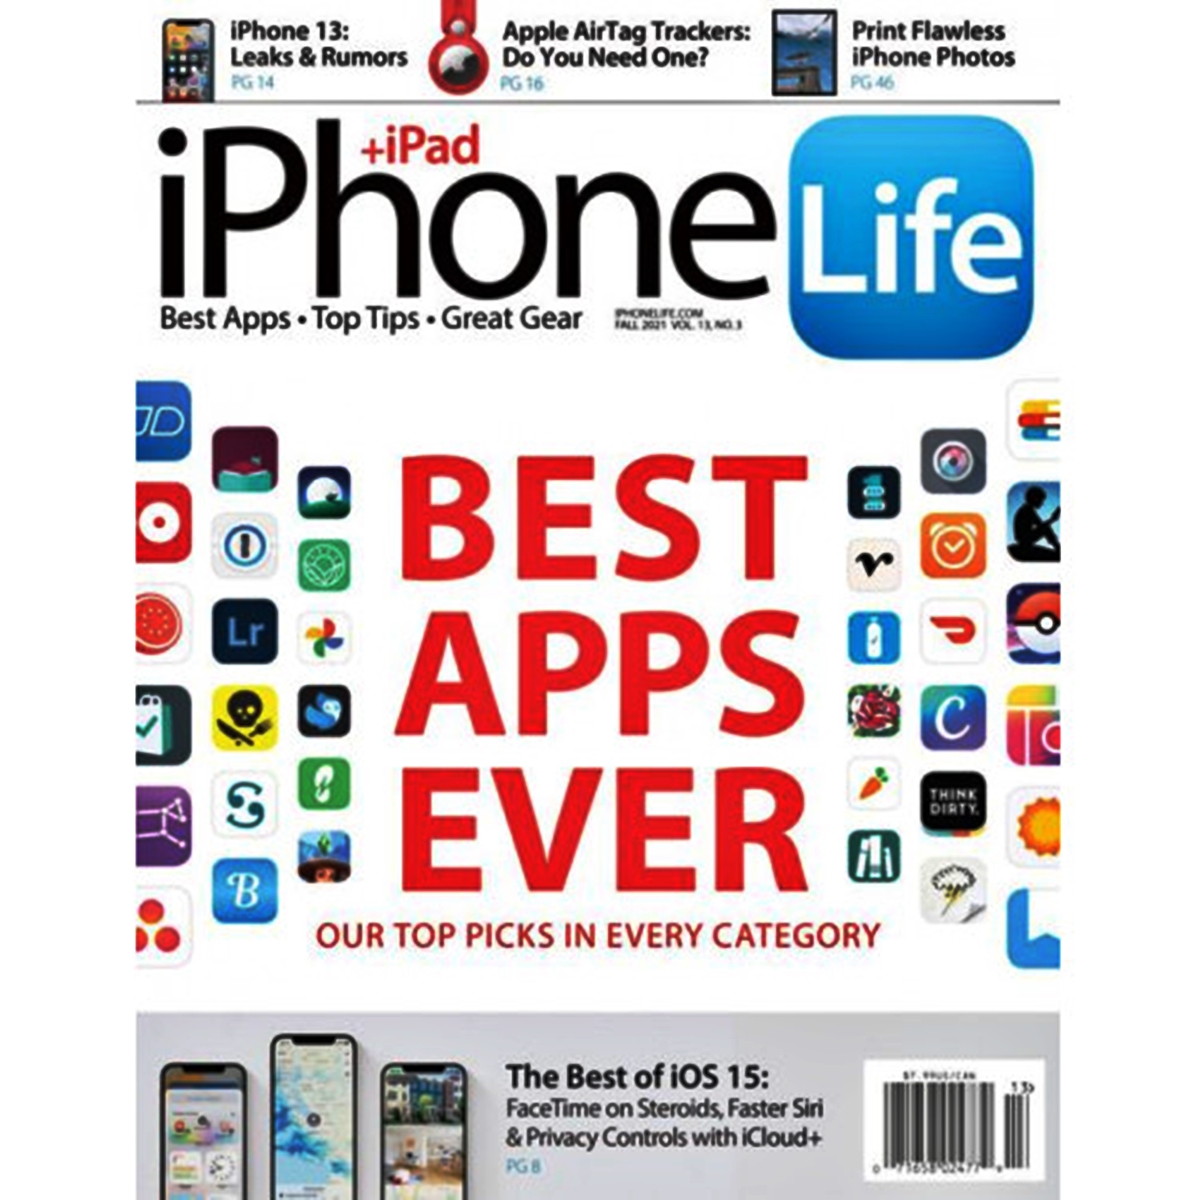 read-the-digital-edition-of-iphone-life-magazine